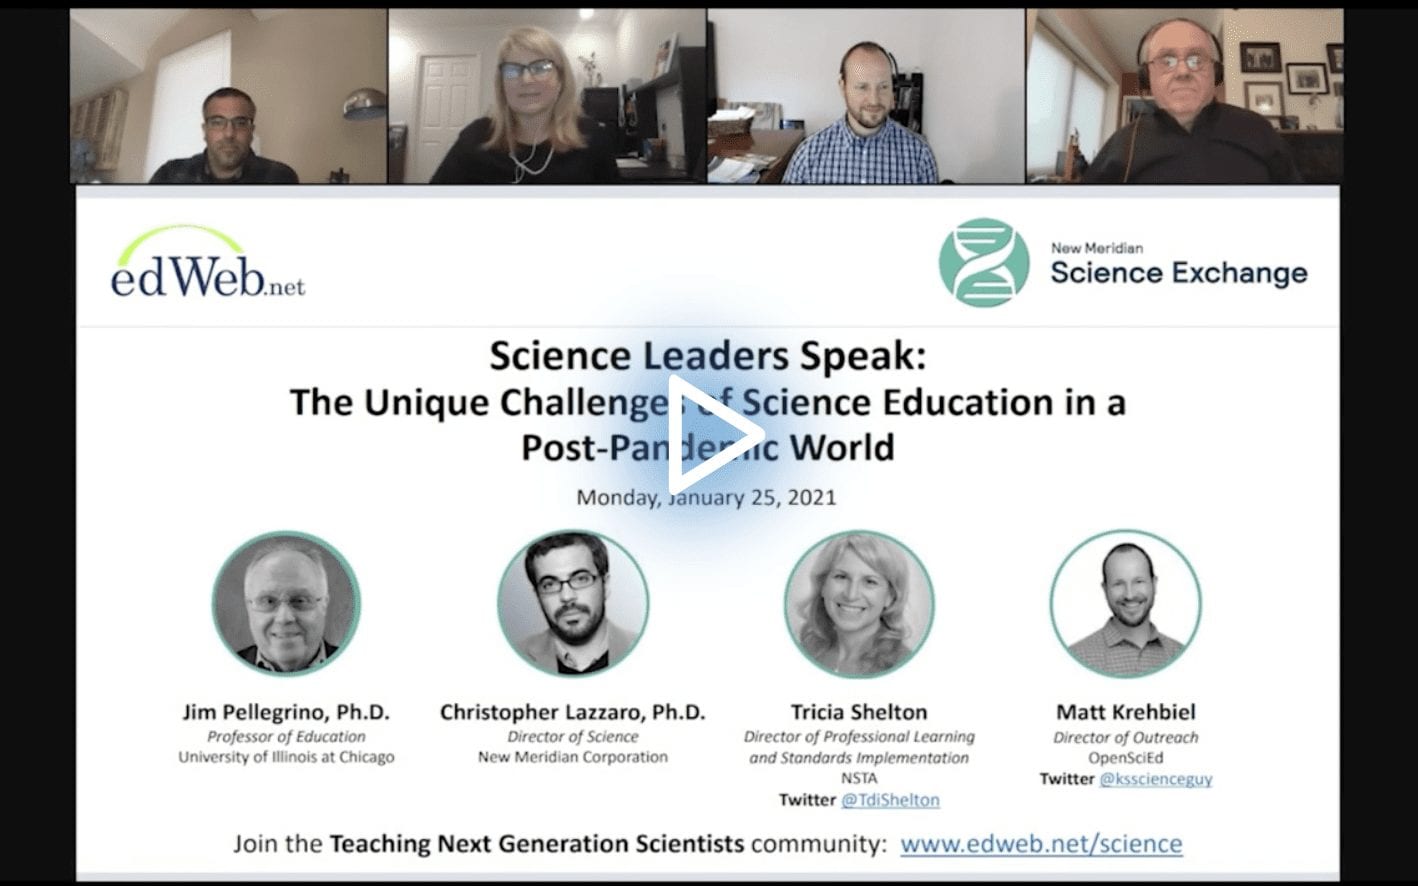 Science Leaders Speak: The Unique Challenges of Science Education in a Post-Pandemic World edWebinar recording link